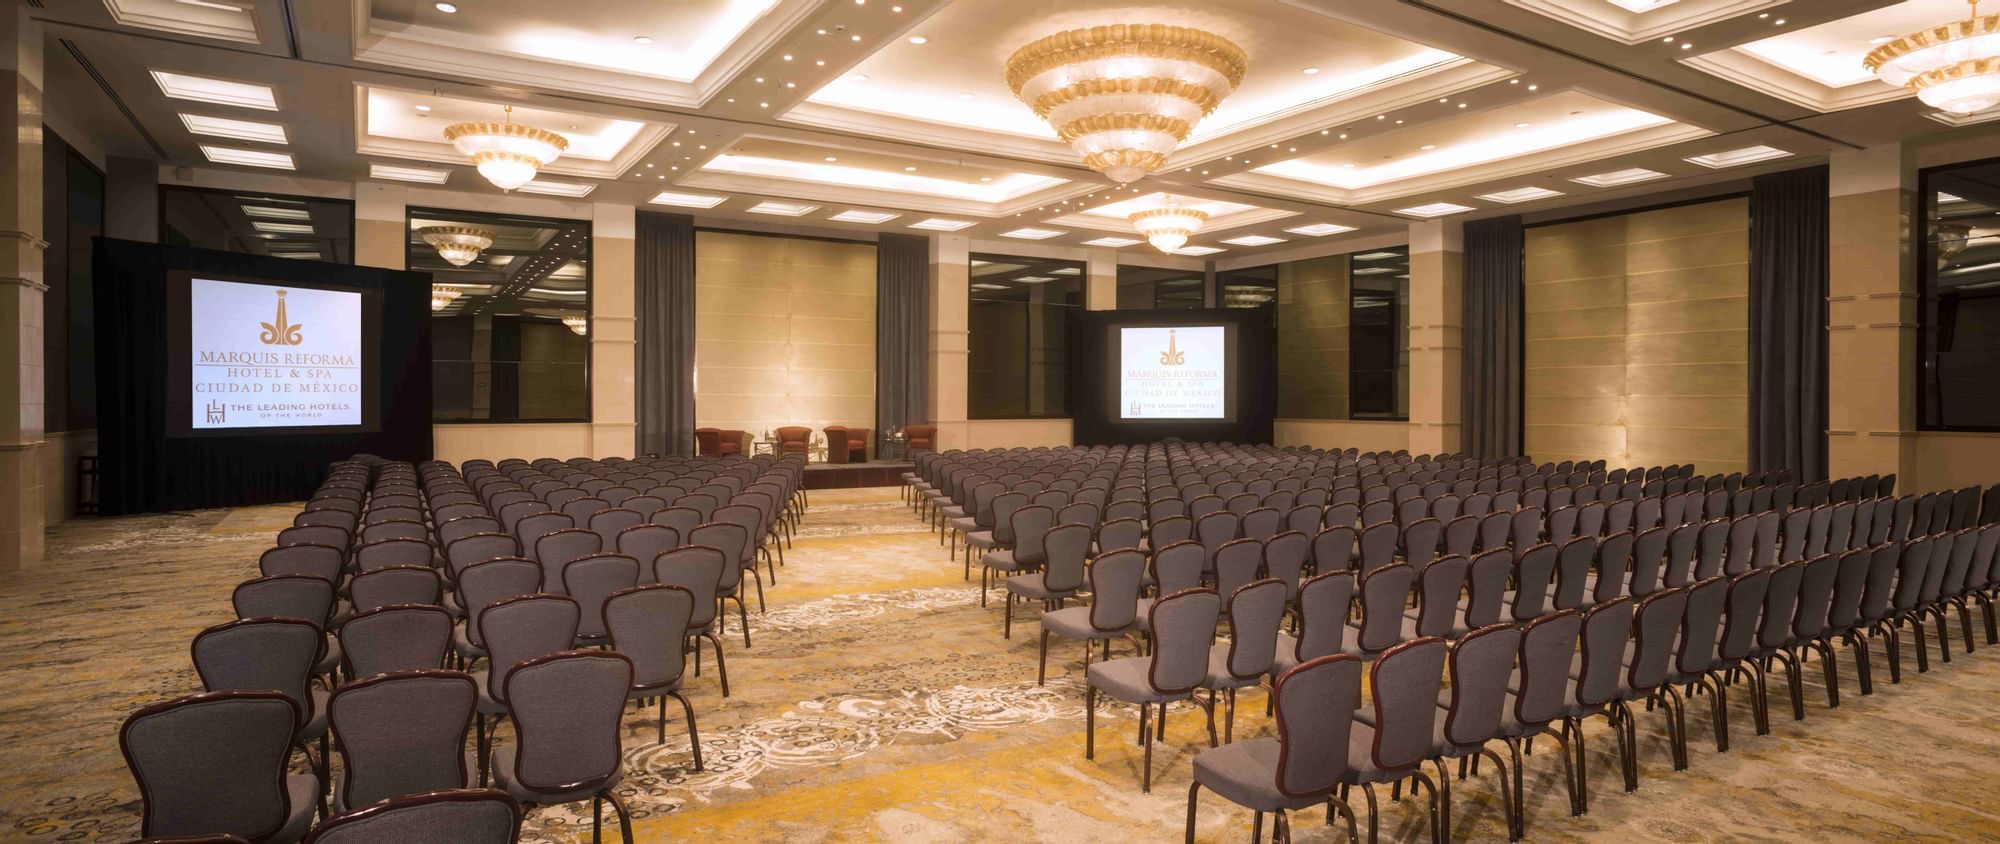 Theater type event room at Marquis Reforma